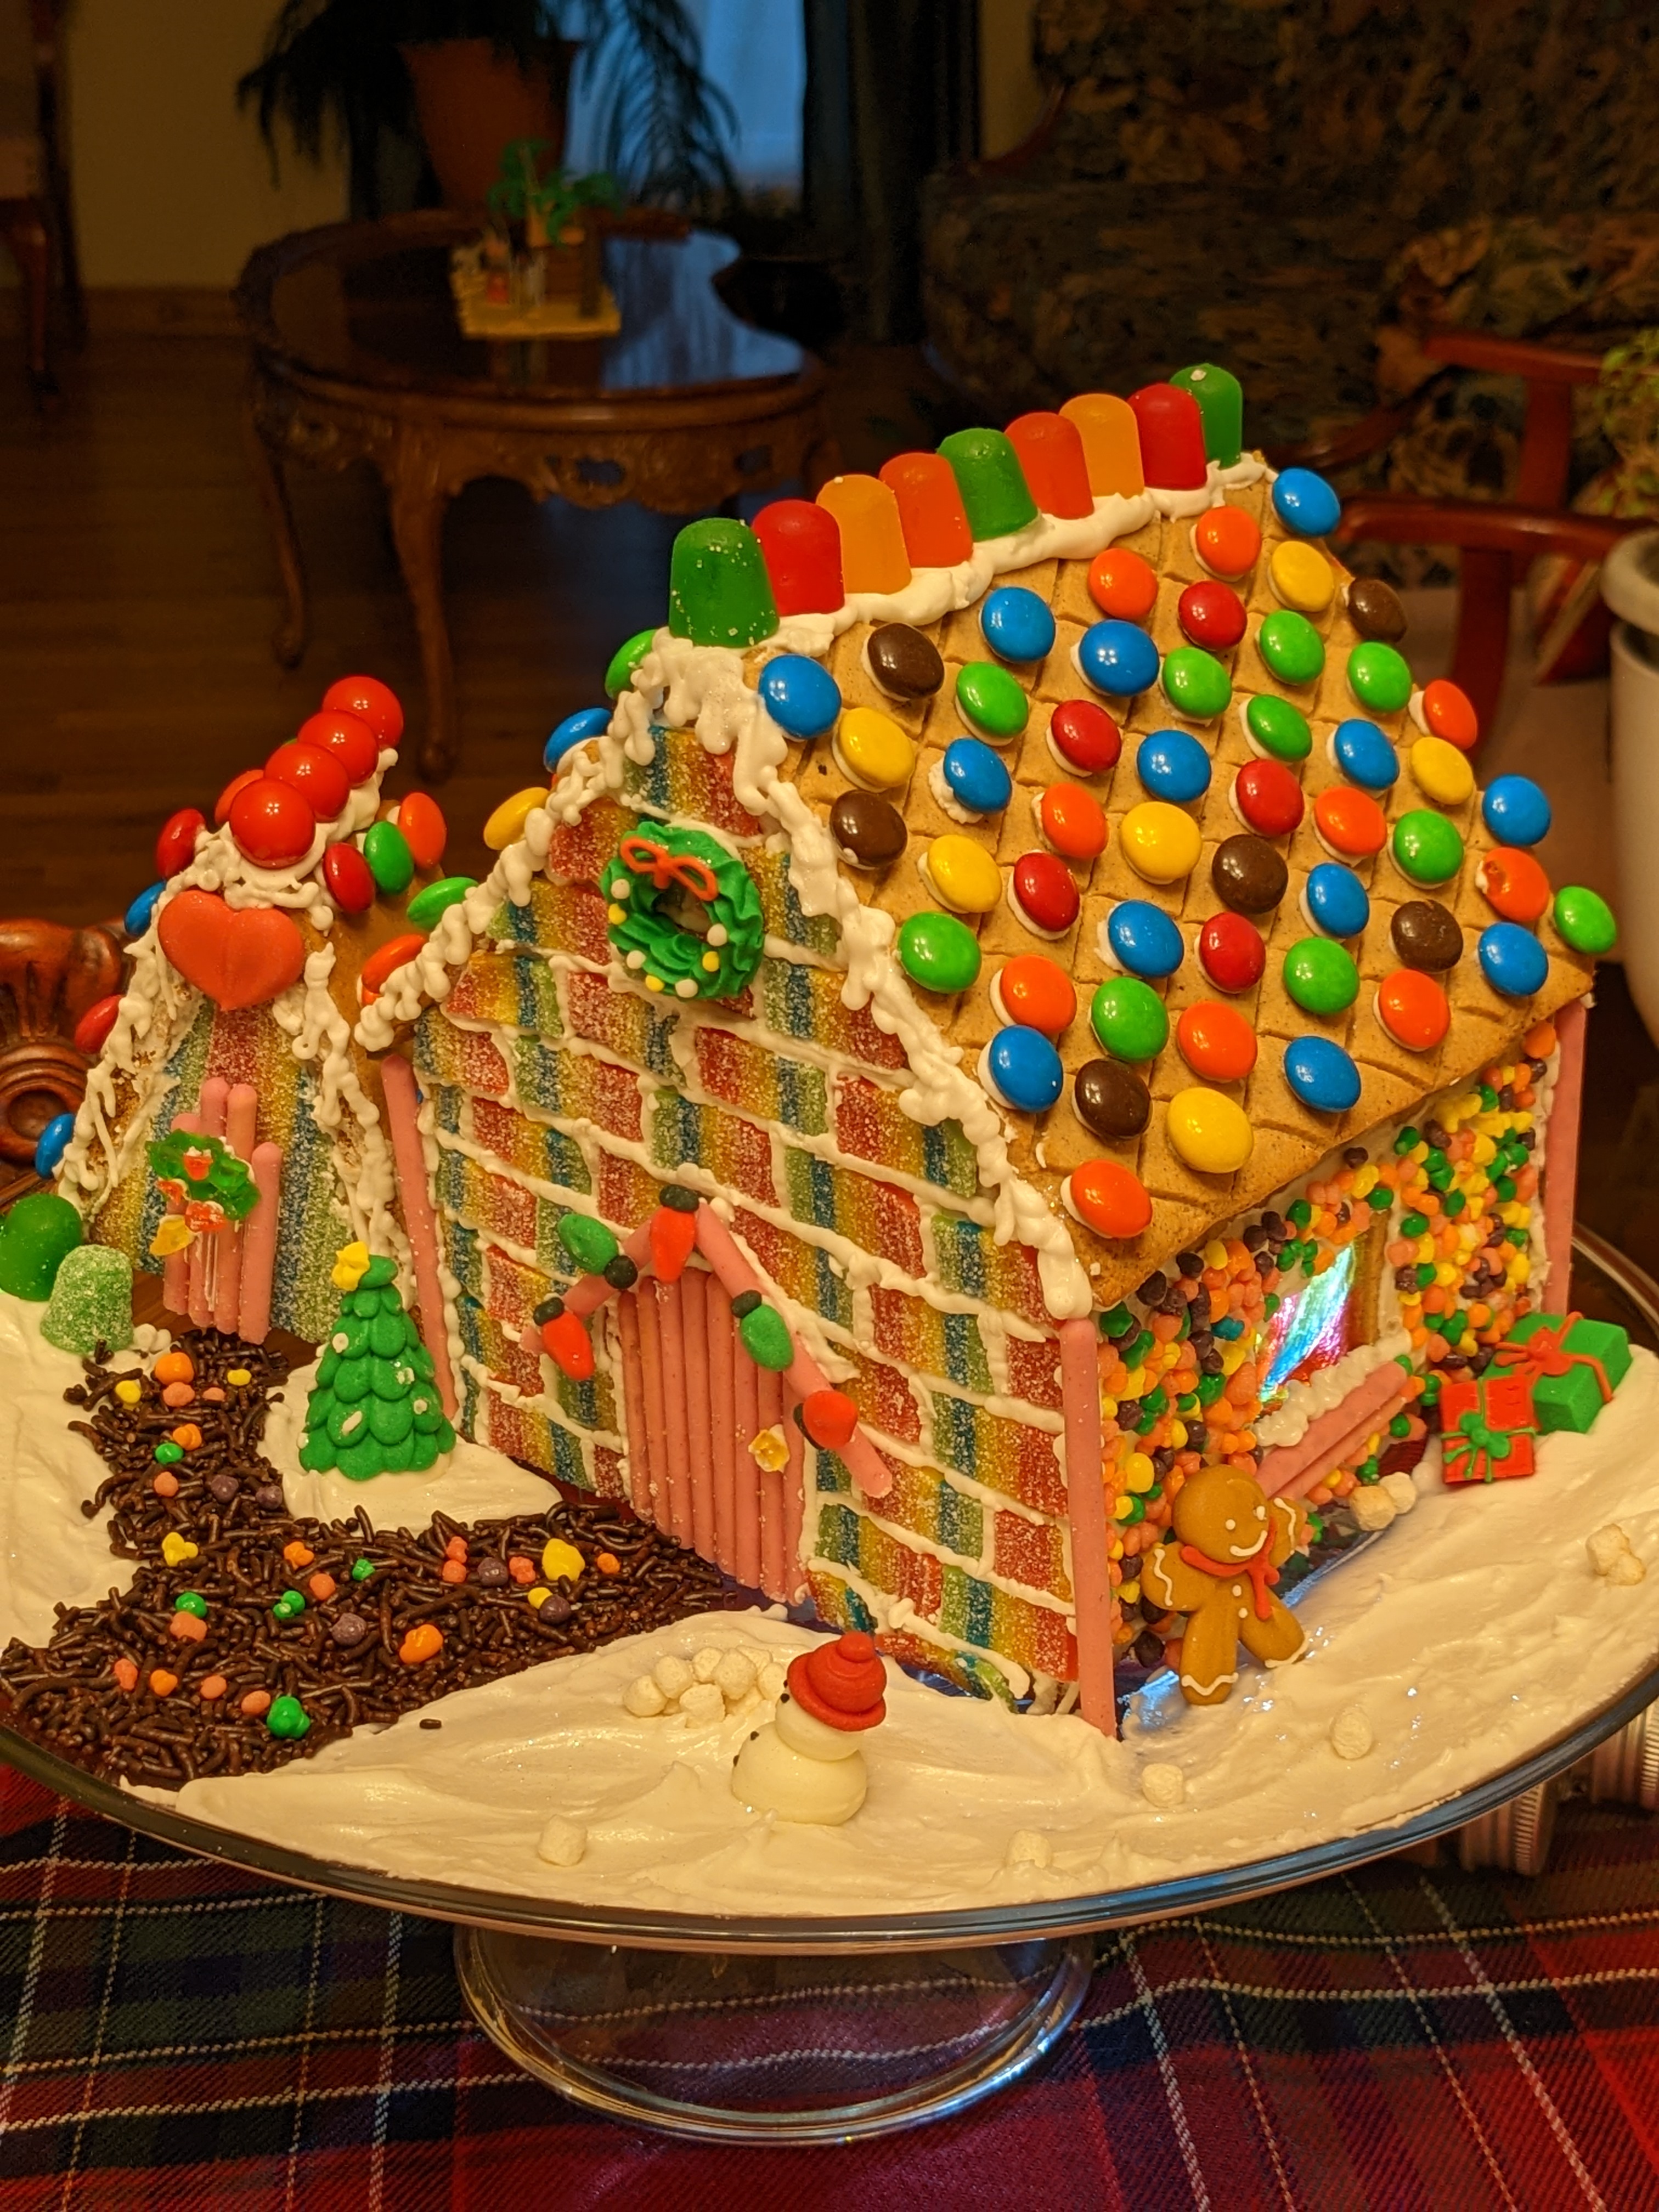 A gingerbread house with colorful candy on the roof and walls.